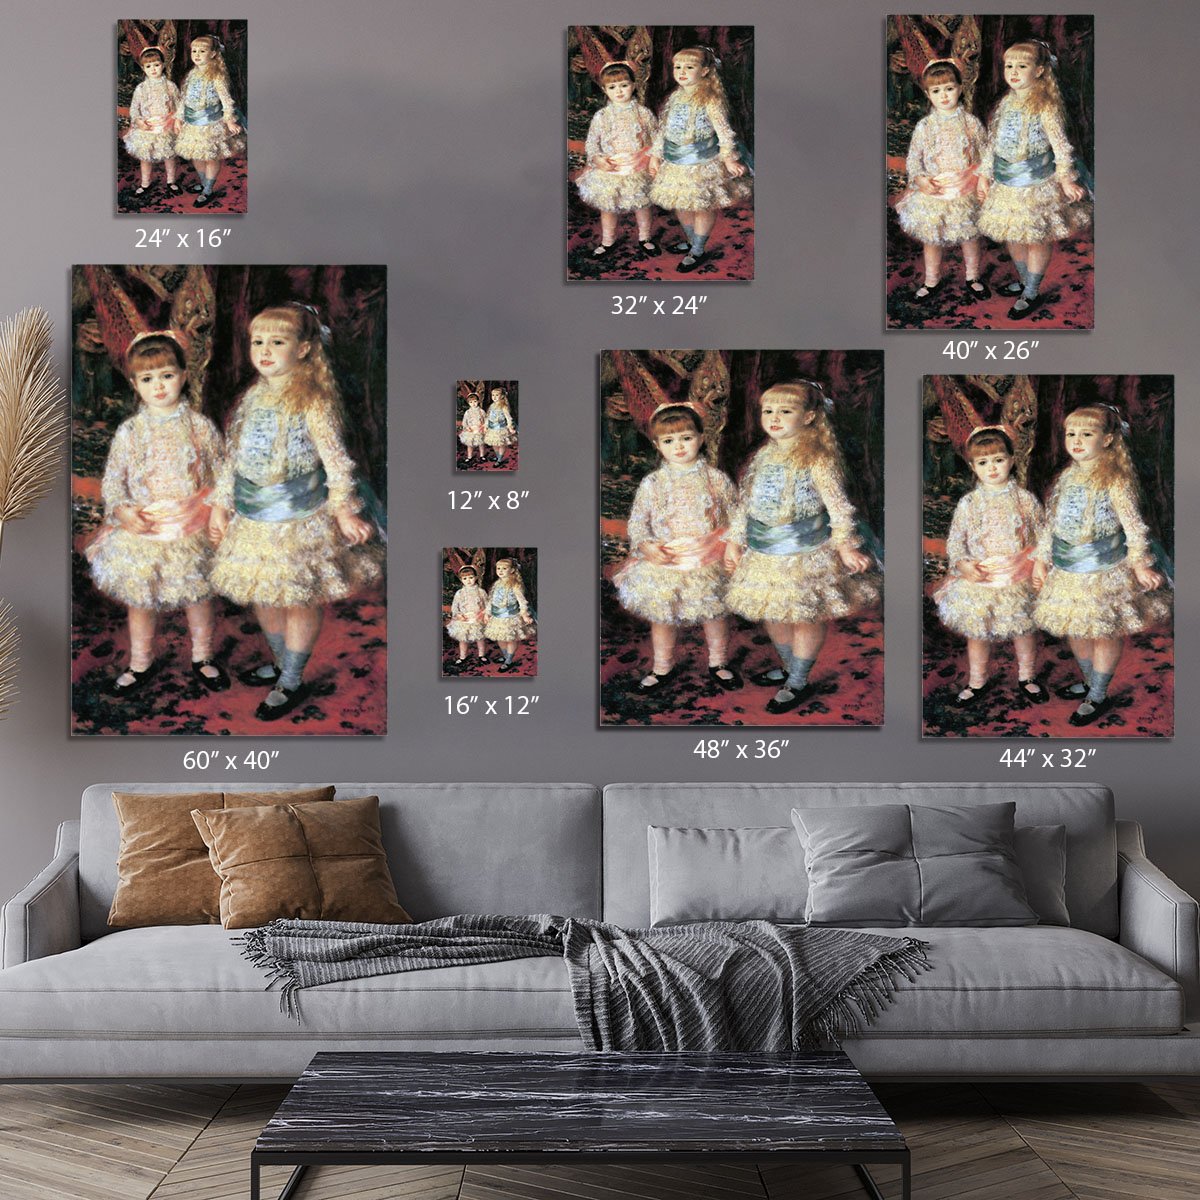 The girls Cahen dAnvers by Renoir Canvas Print or Poster